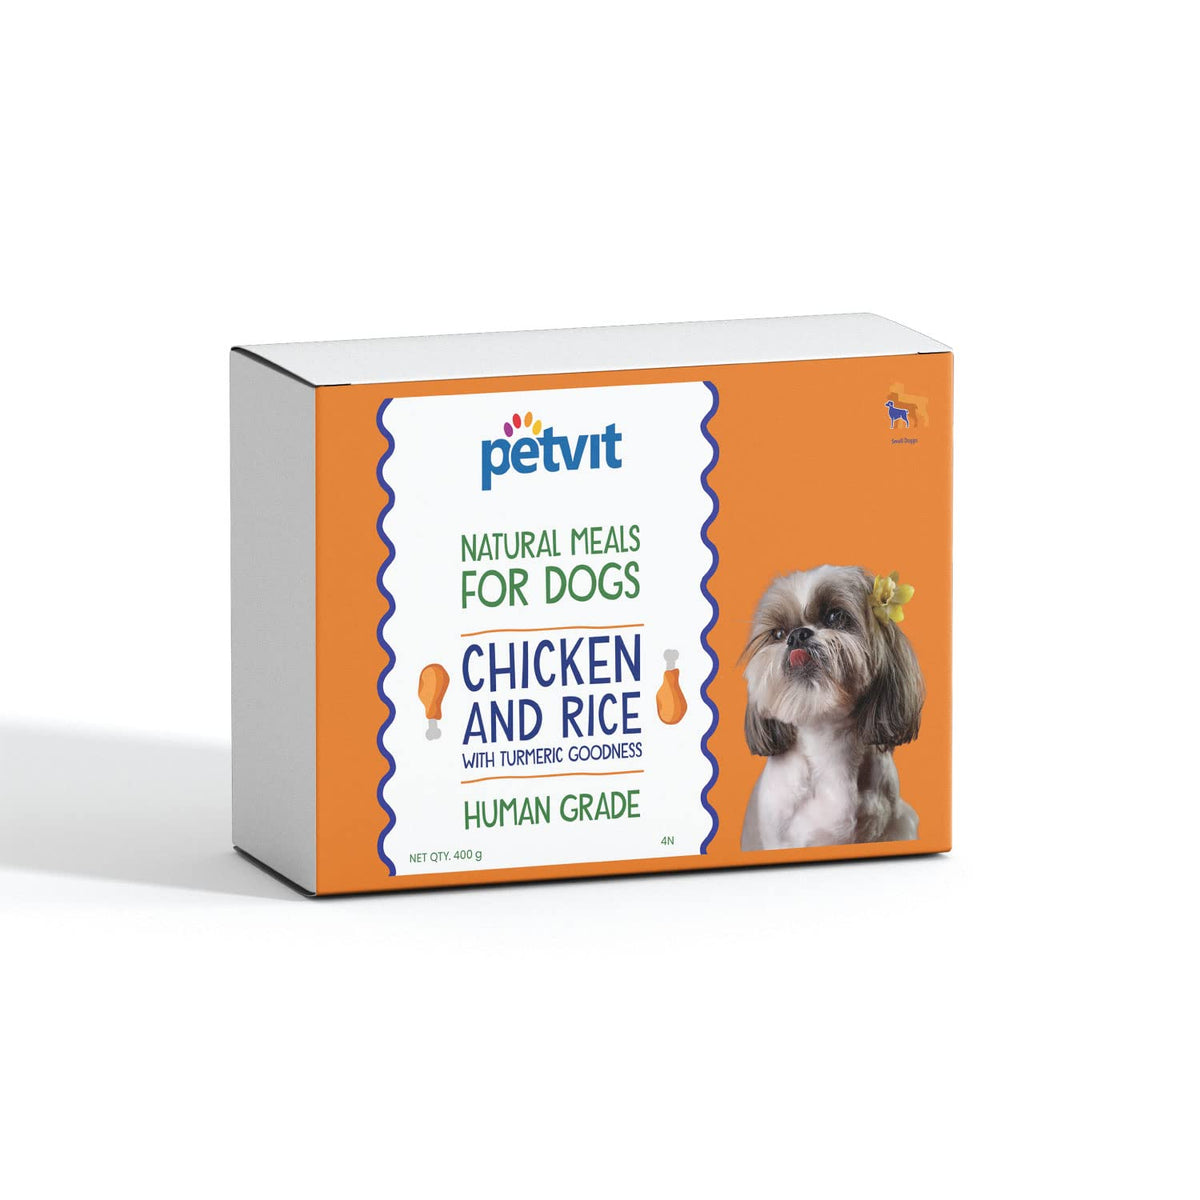 Petvit Chicken Rice Dog Food with Real Chicken Meat, Supports Joint and Bone Health, Enhanced with Antioxidant-Rich Turmeric - Healthy and Nutritional Pet Food | Pack of 4 (100g Each)